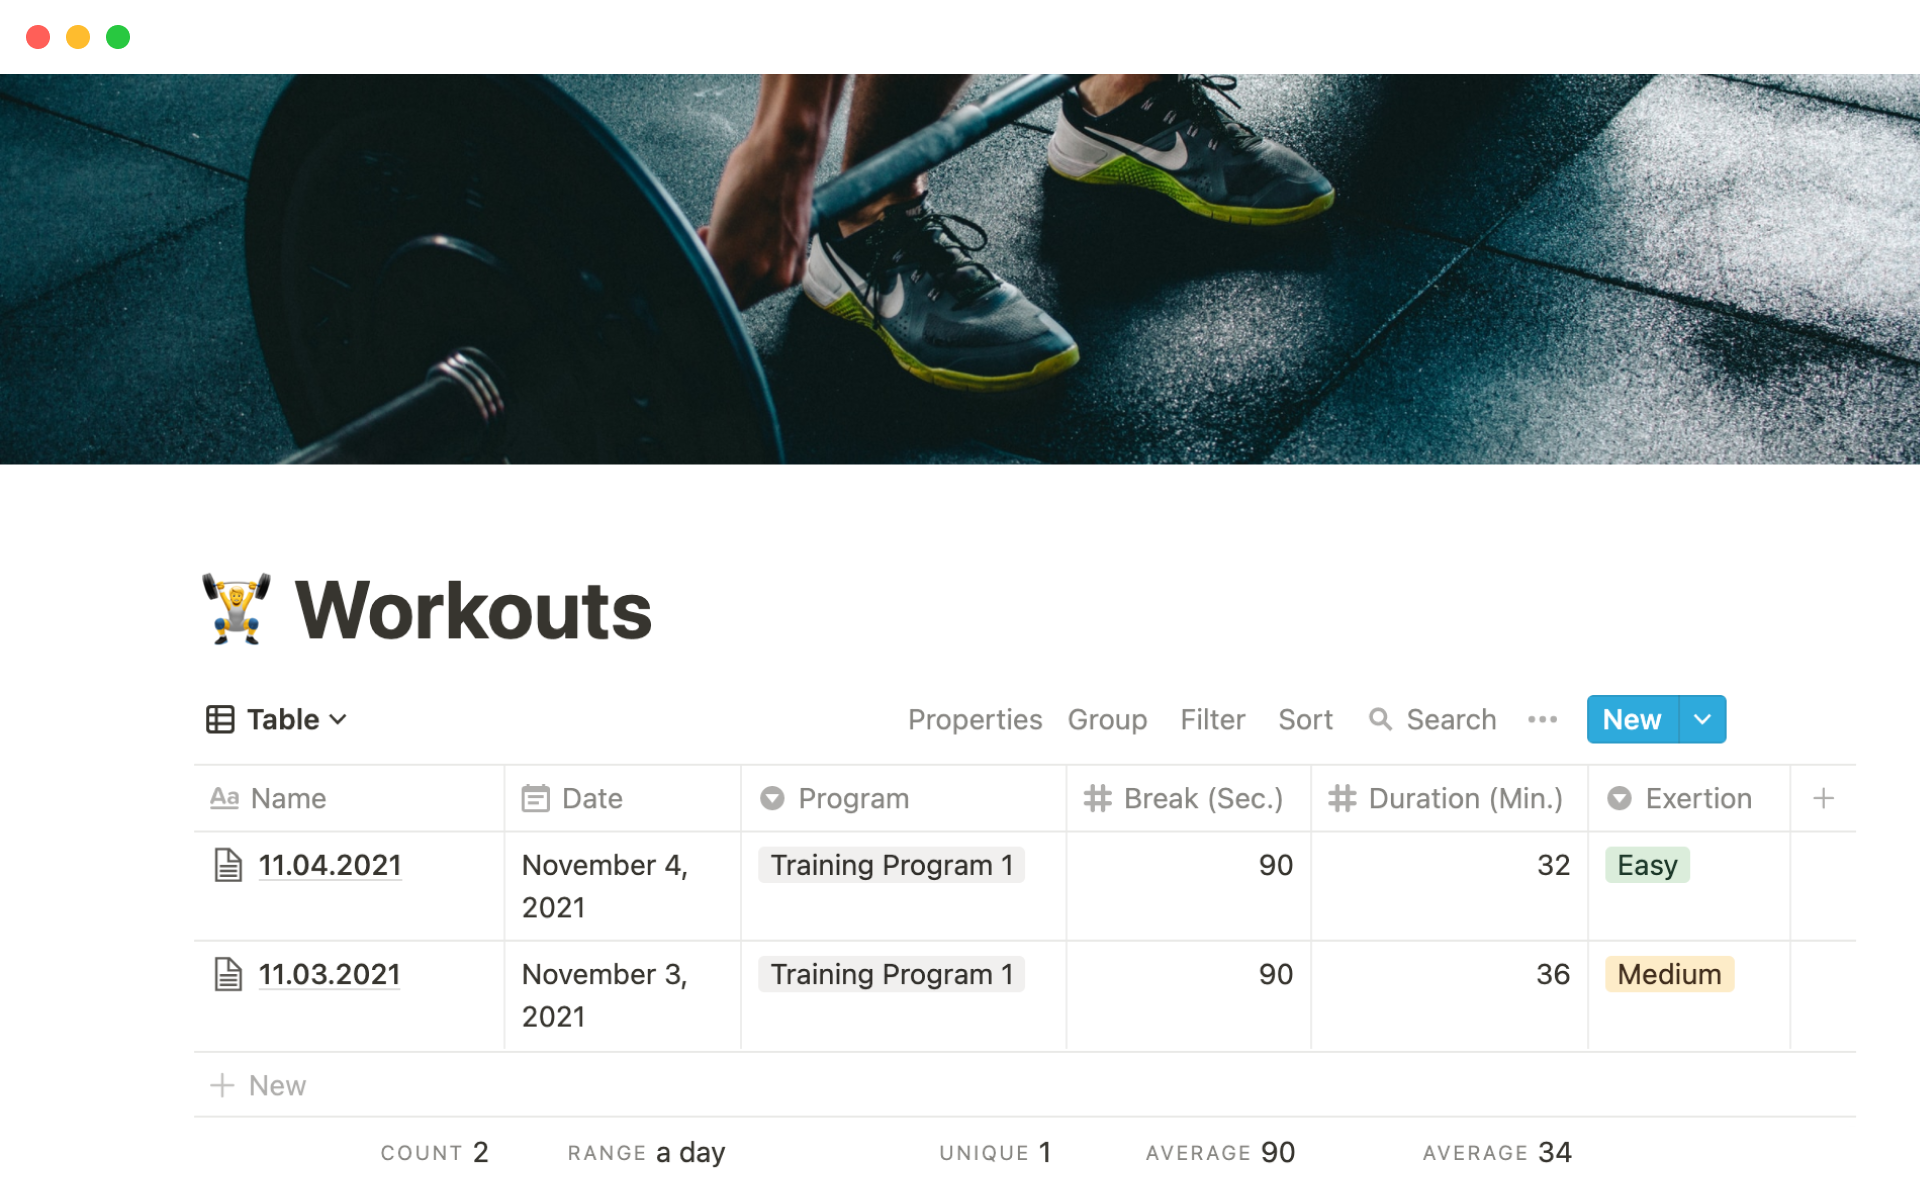 The desktop image for the Workouts template